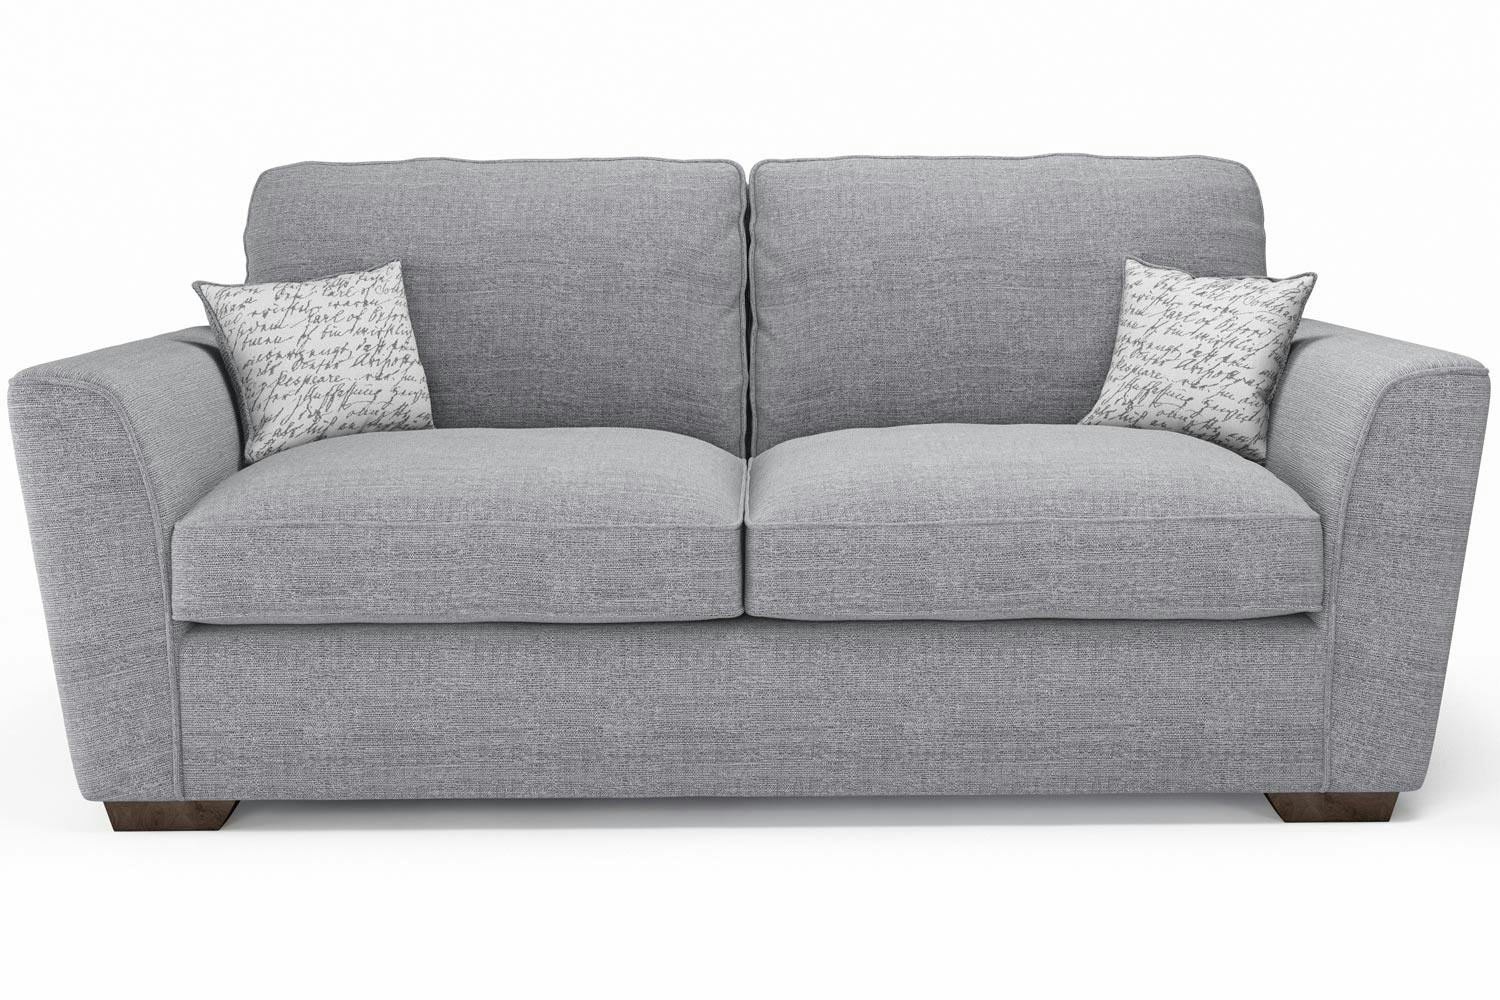 3.5 seater sofa bed